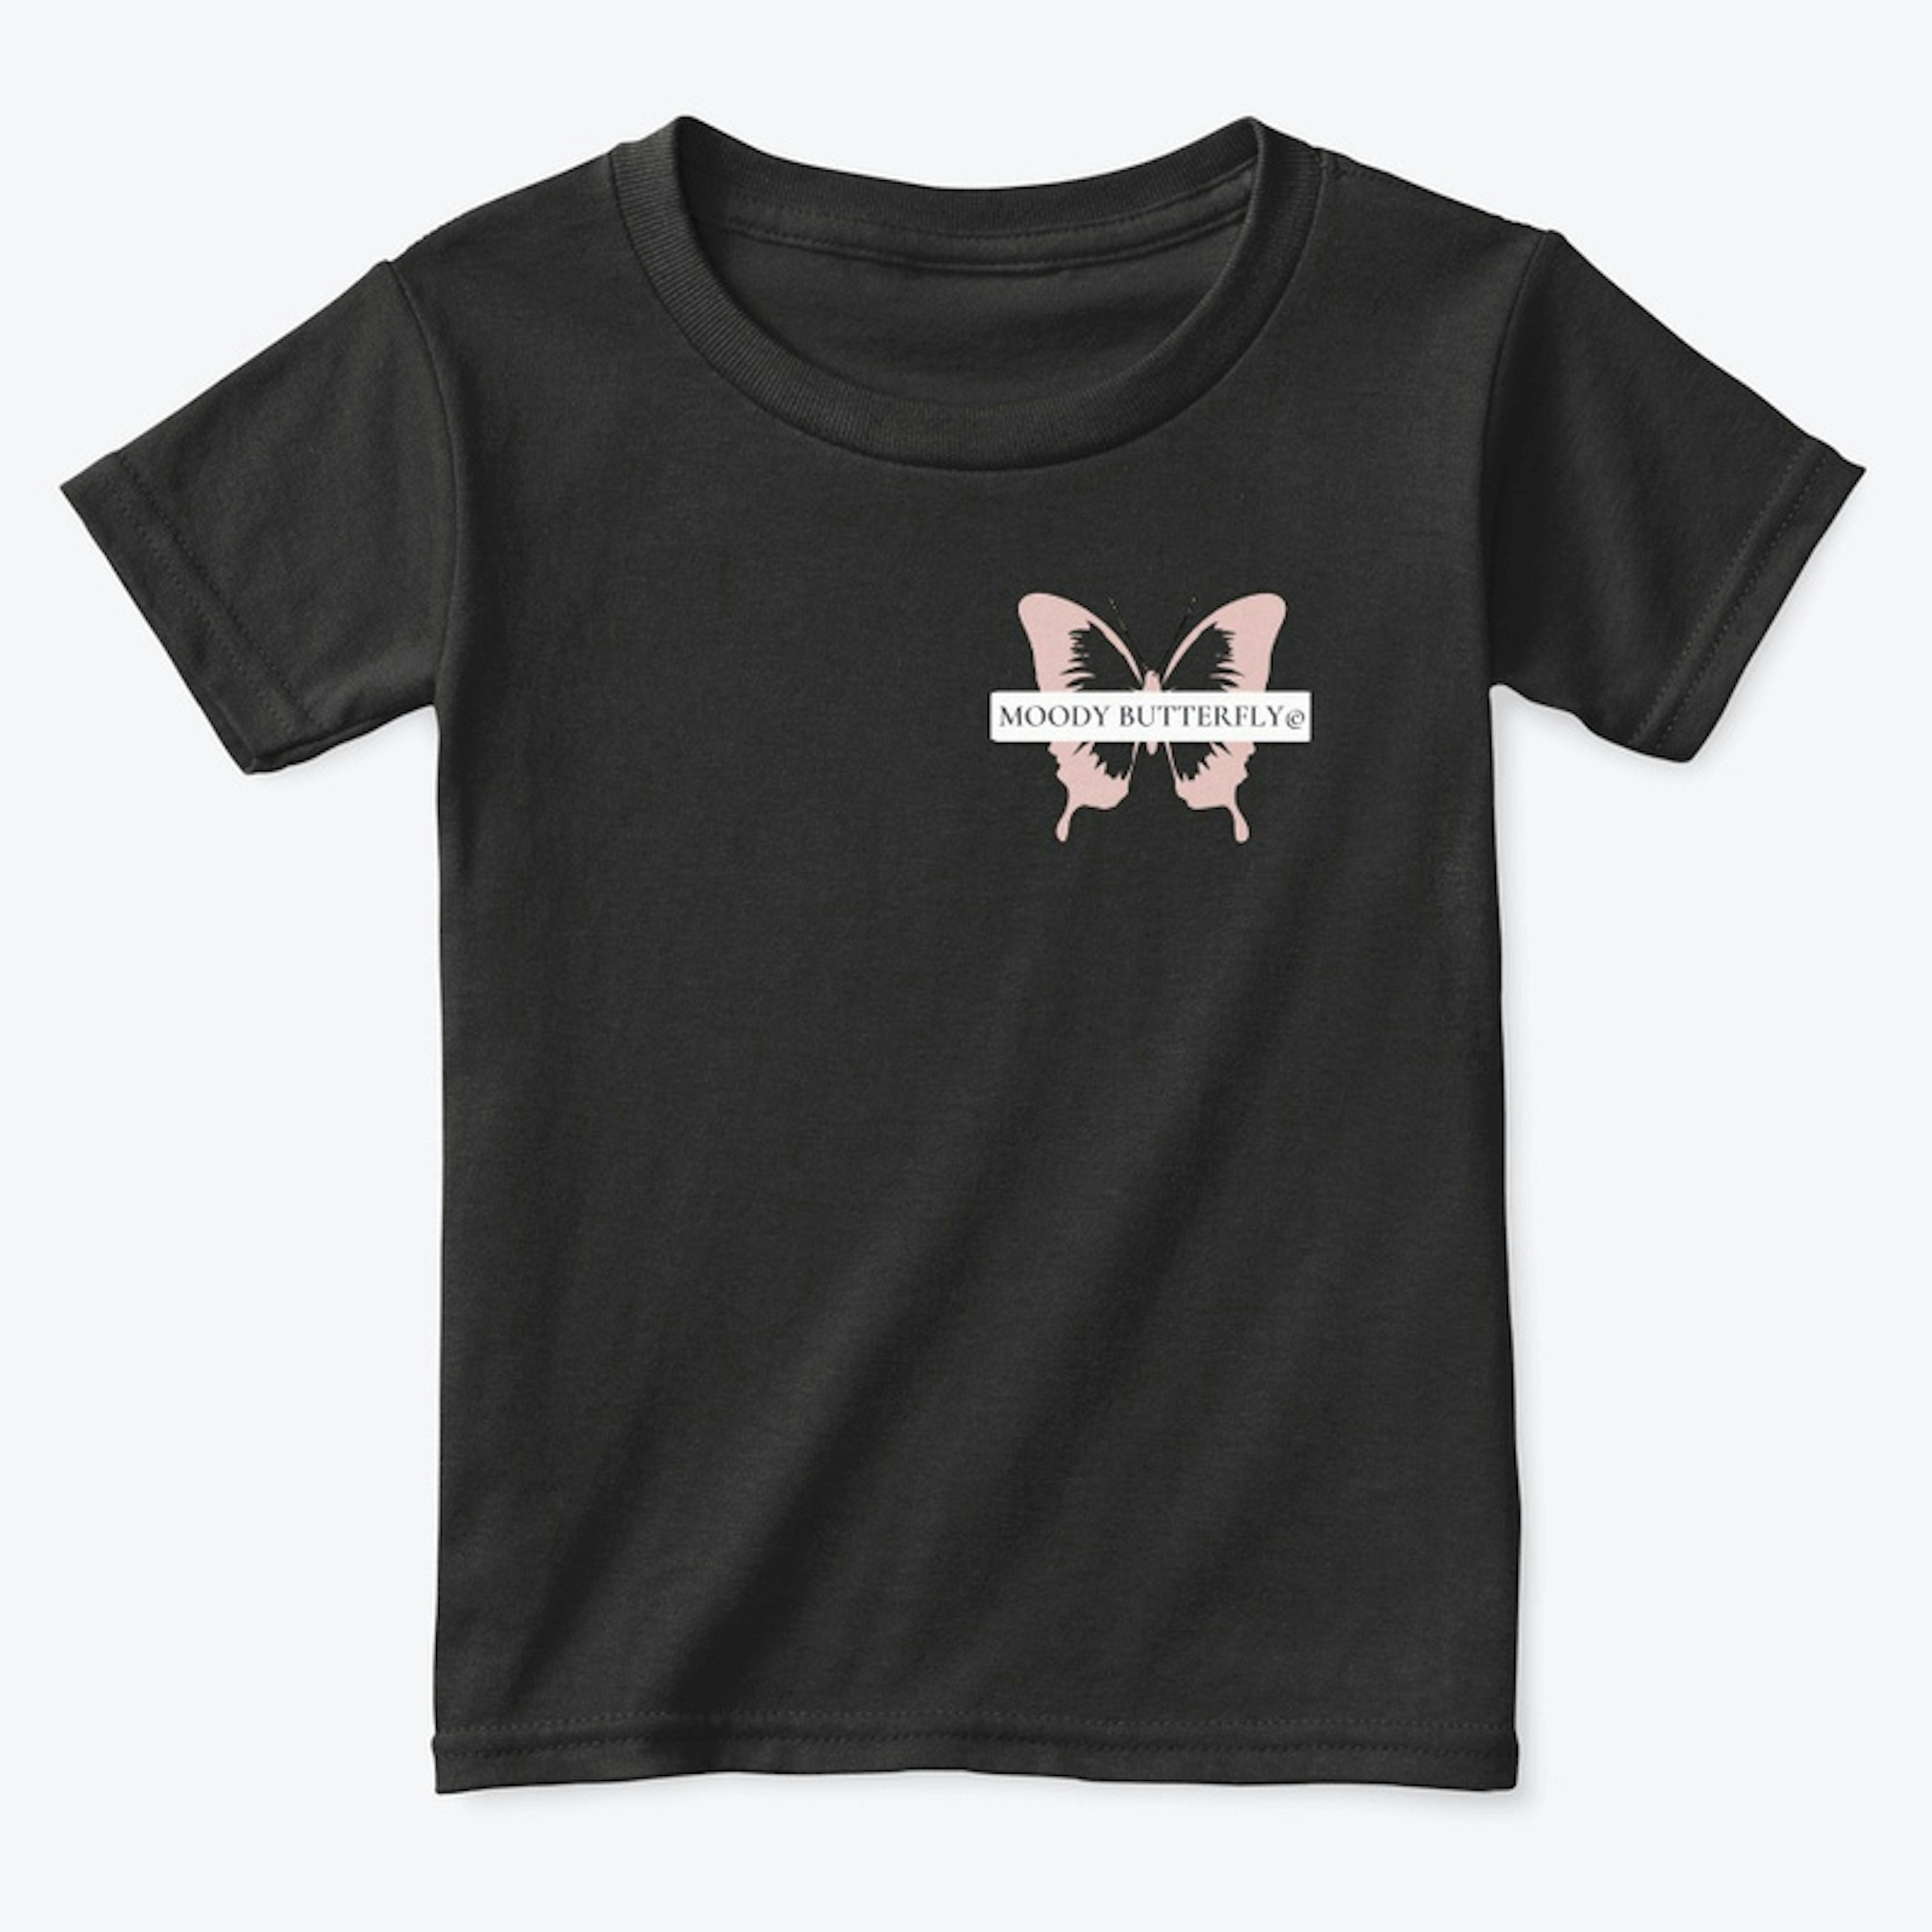 Moody Butterfly Tees & Decor